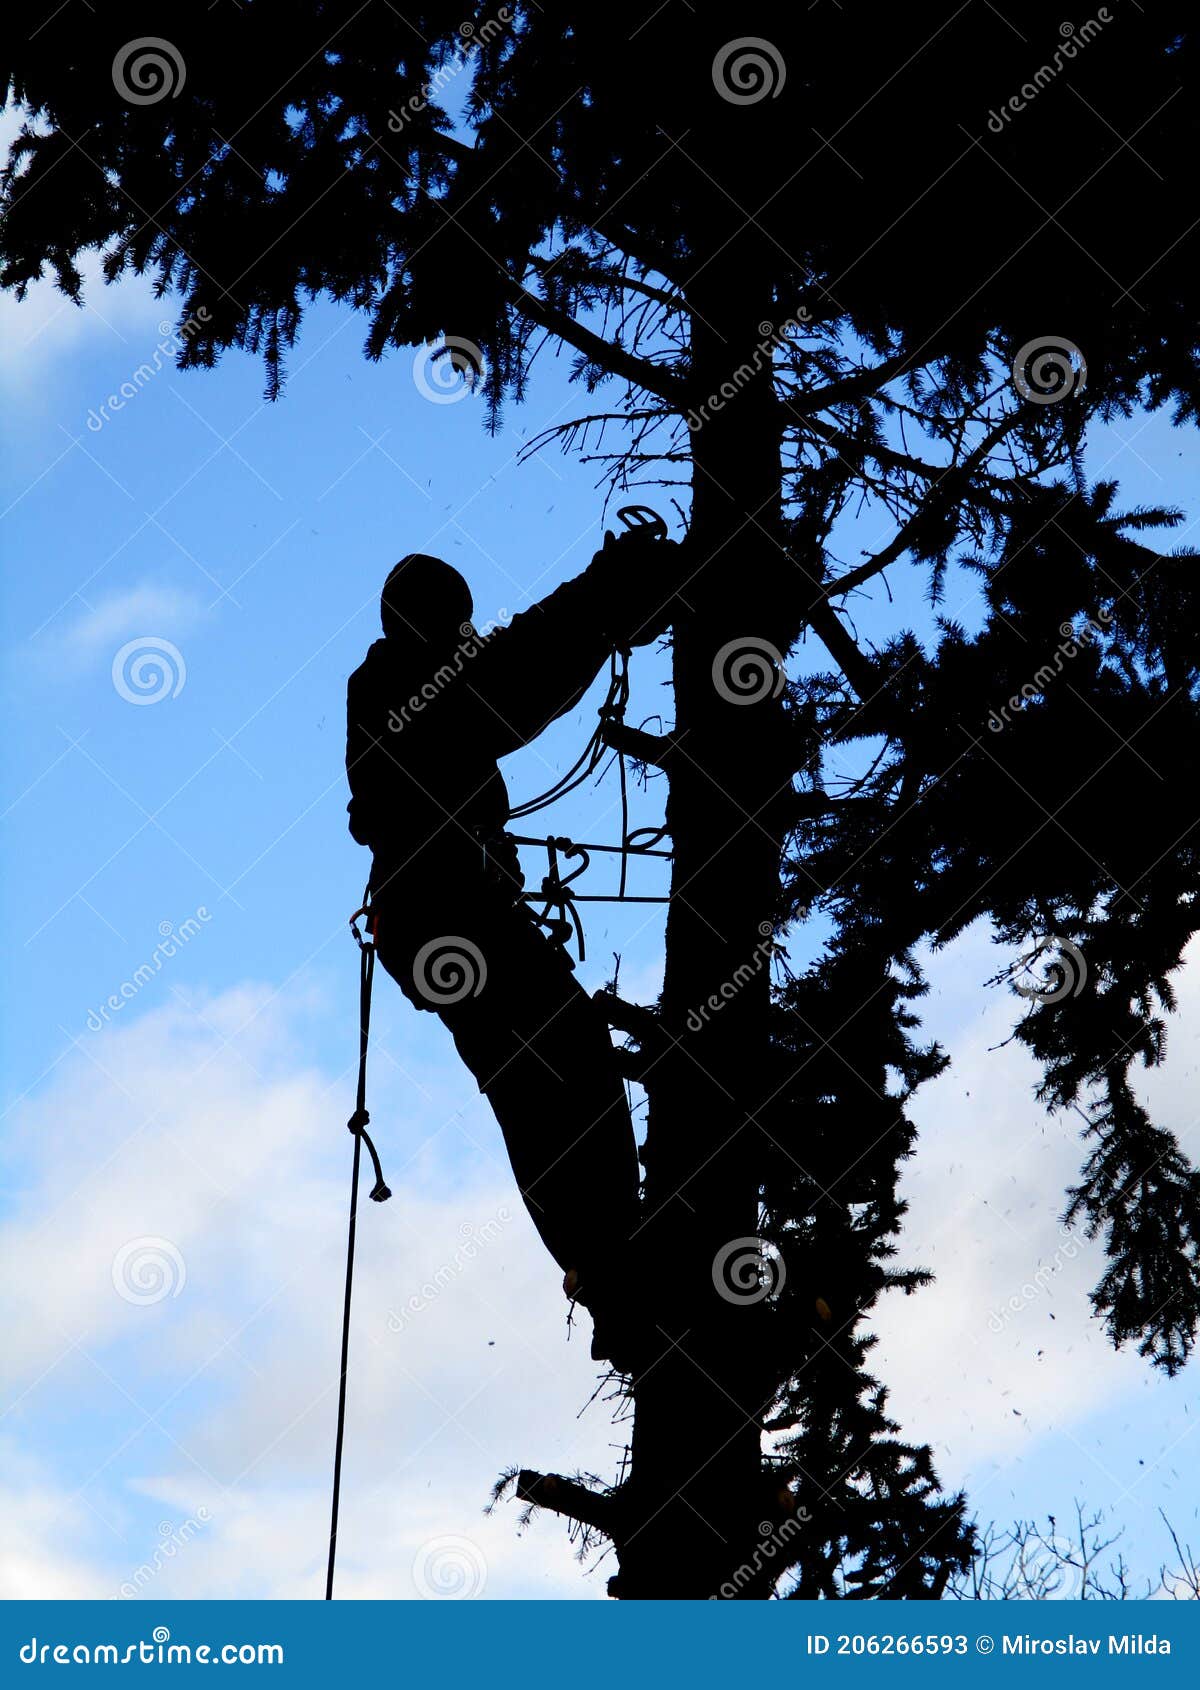 Tree Climber at Works Silhouette Stock Image - Image of light, challenge:  206266593